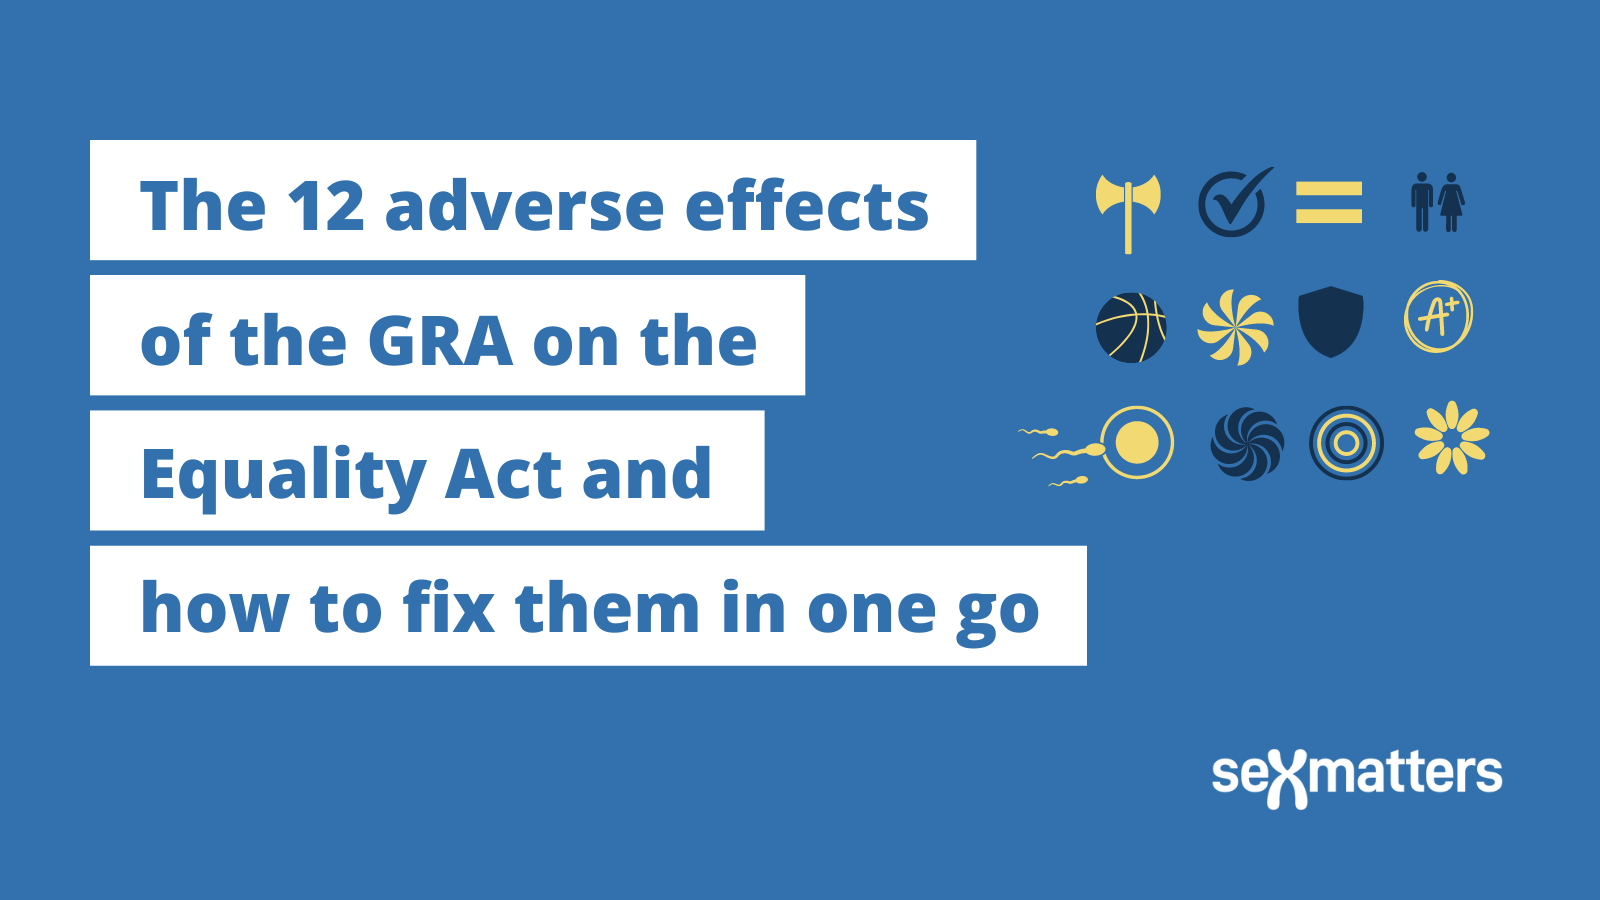 The 12 adverse effects of the GRA on the Equality Act and how to fix them in one go